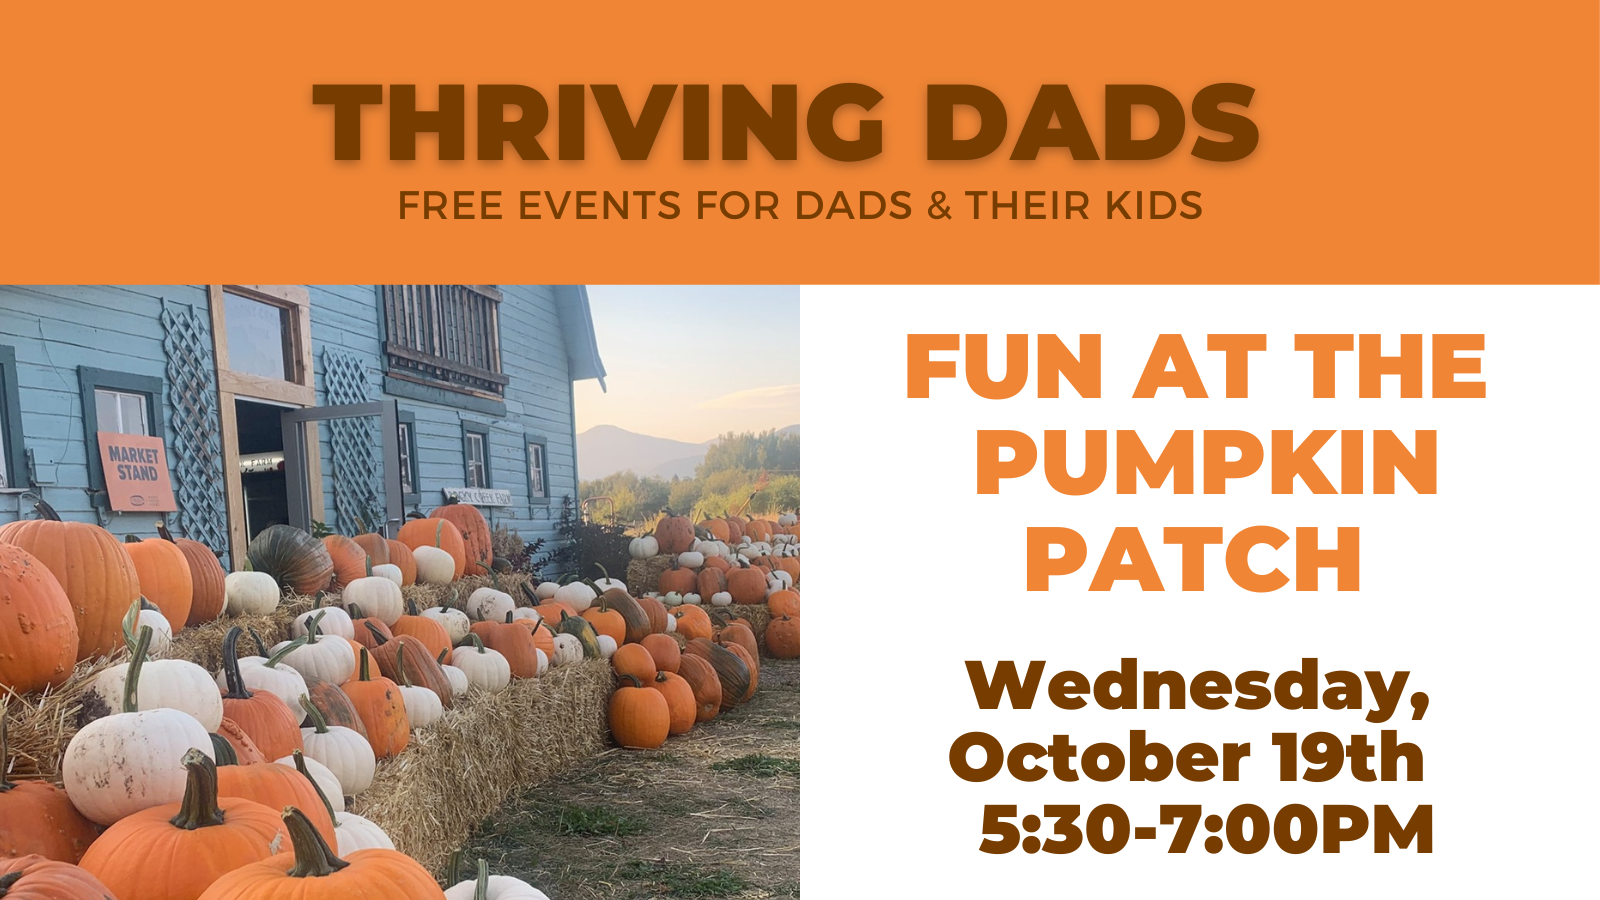 Thriving Dads Fun at the Pumpkin Patch